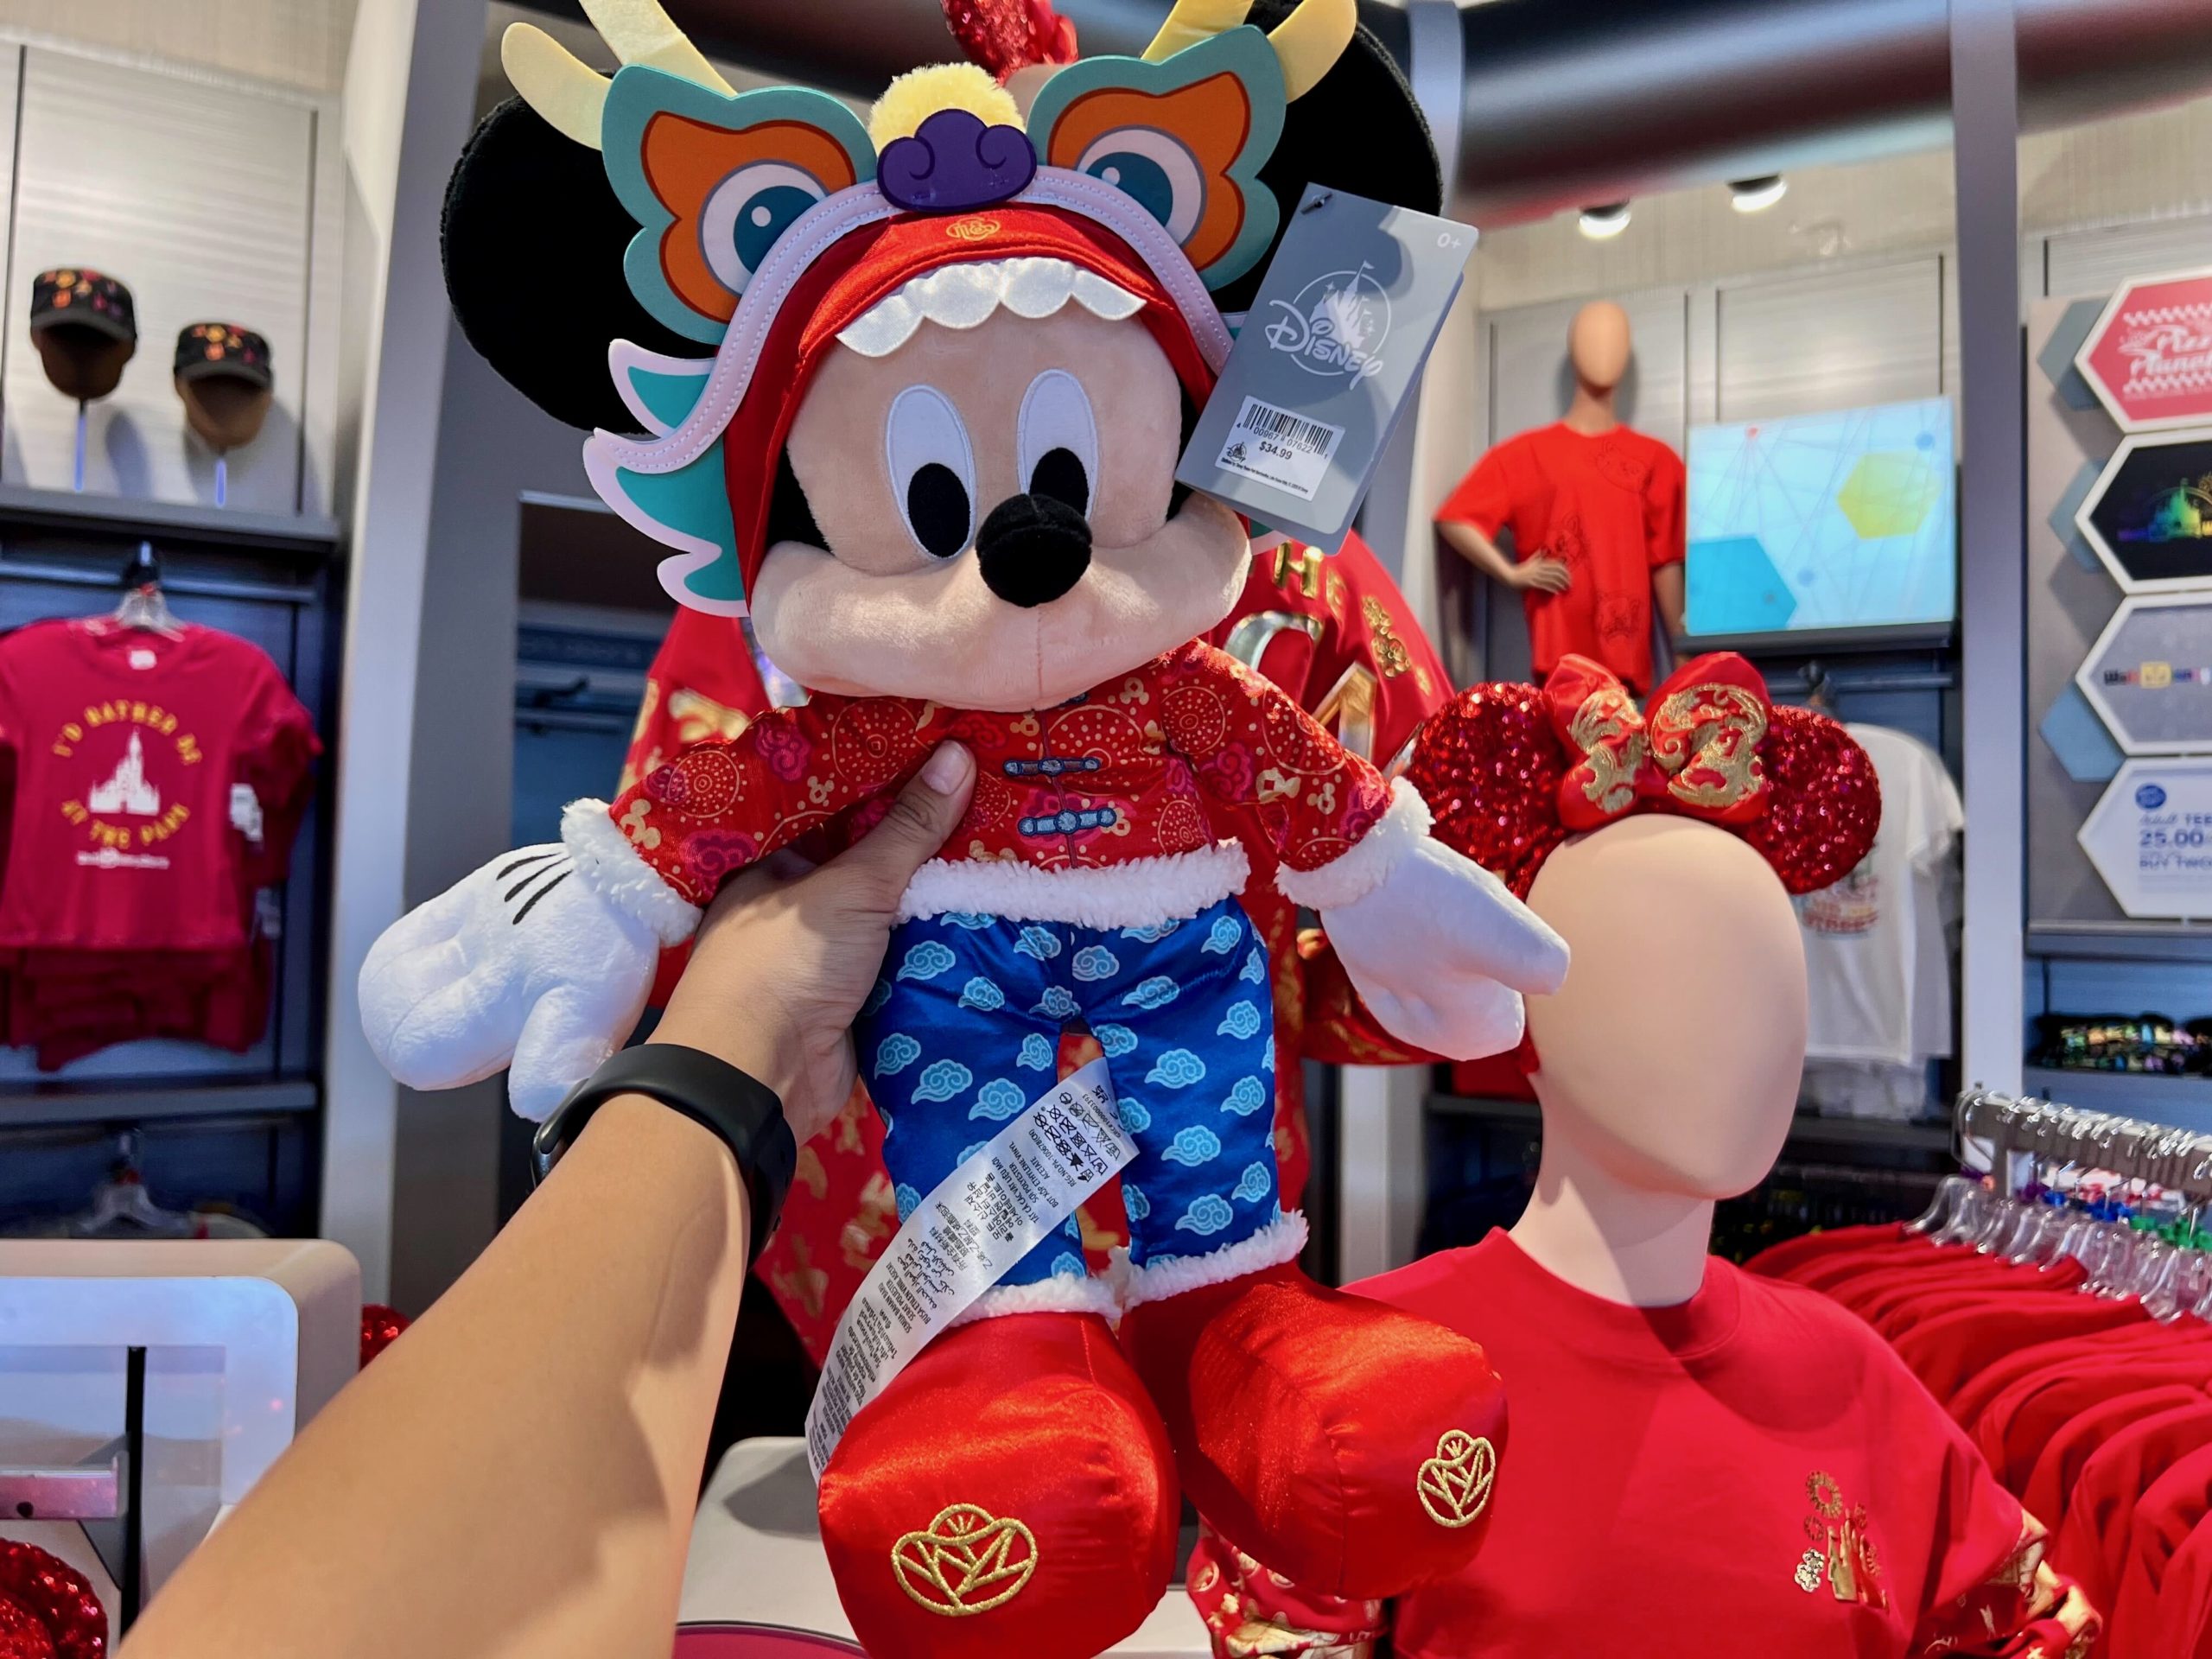 Year of the Dragon Lunar New Year Mickey Plush Star traders